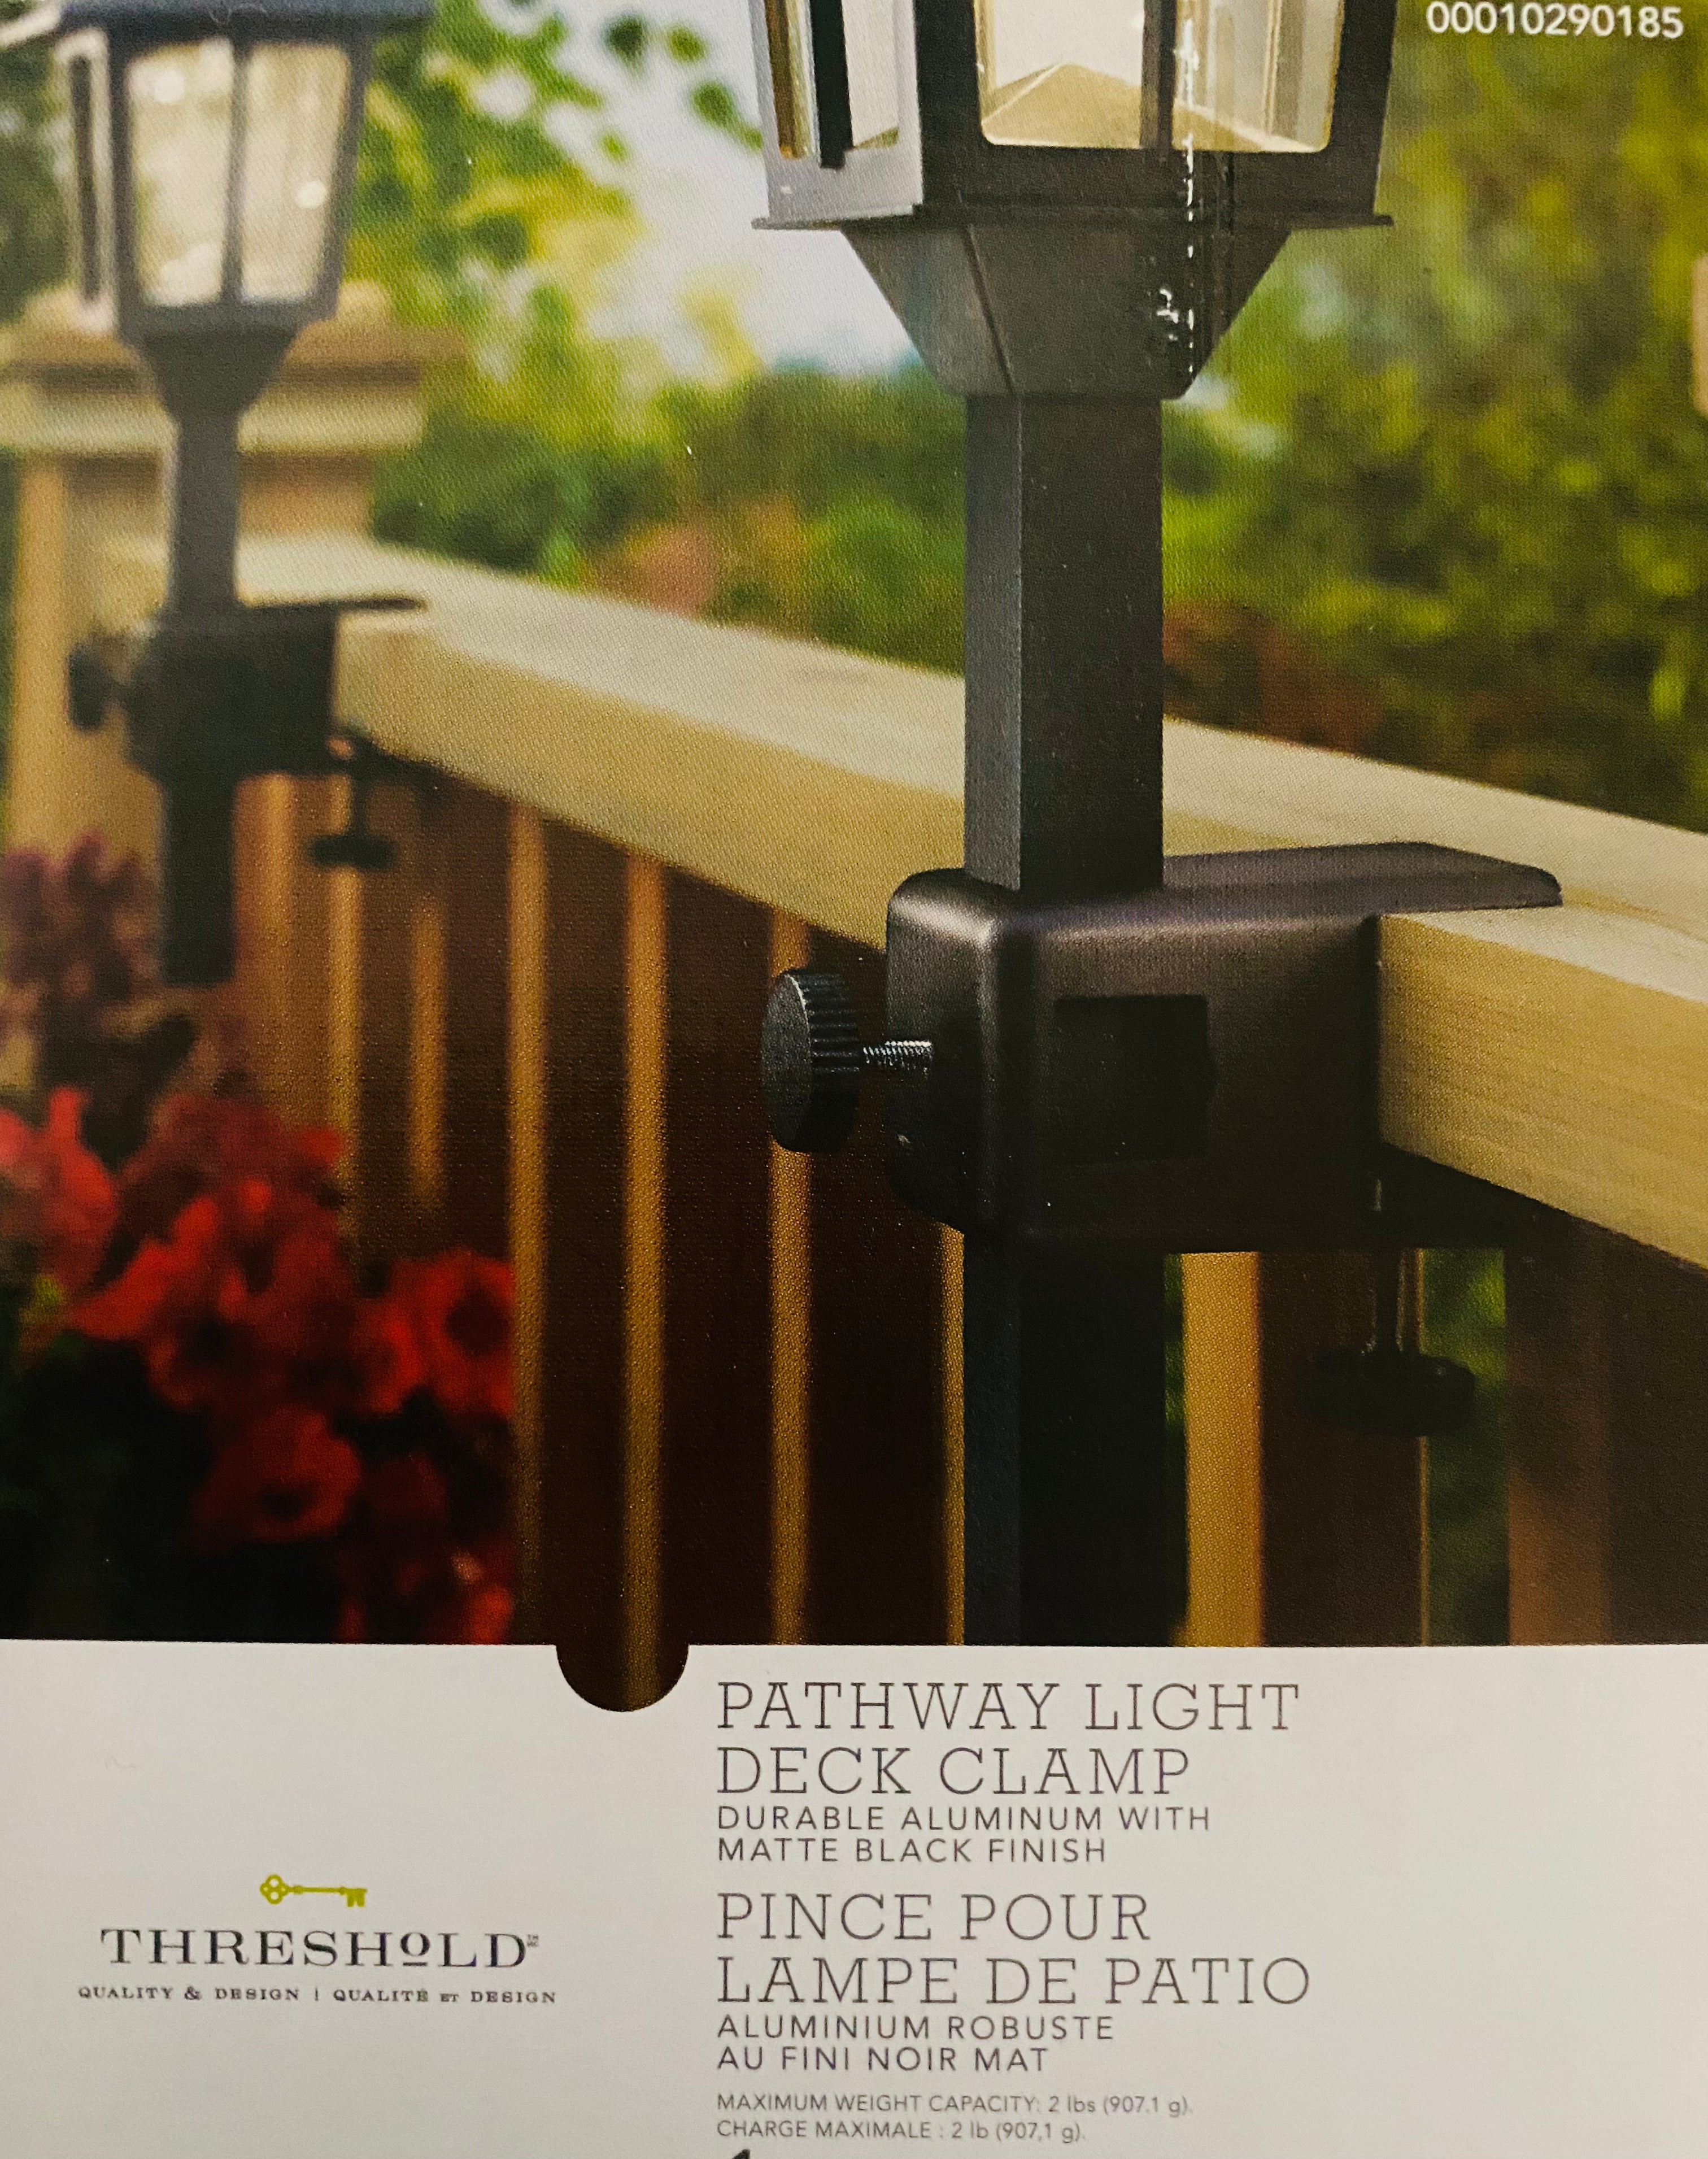 Threshold Deck Torch Clamp,For Pathway Lights -2 Pack [Aluminum]